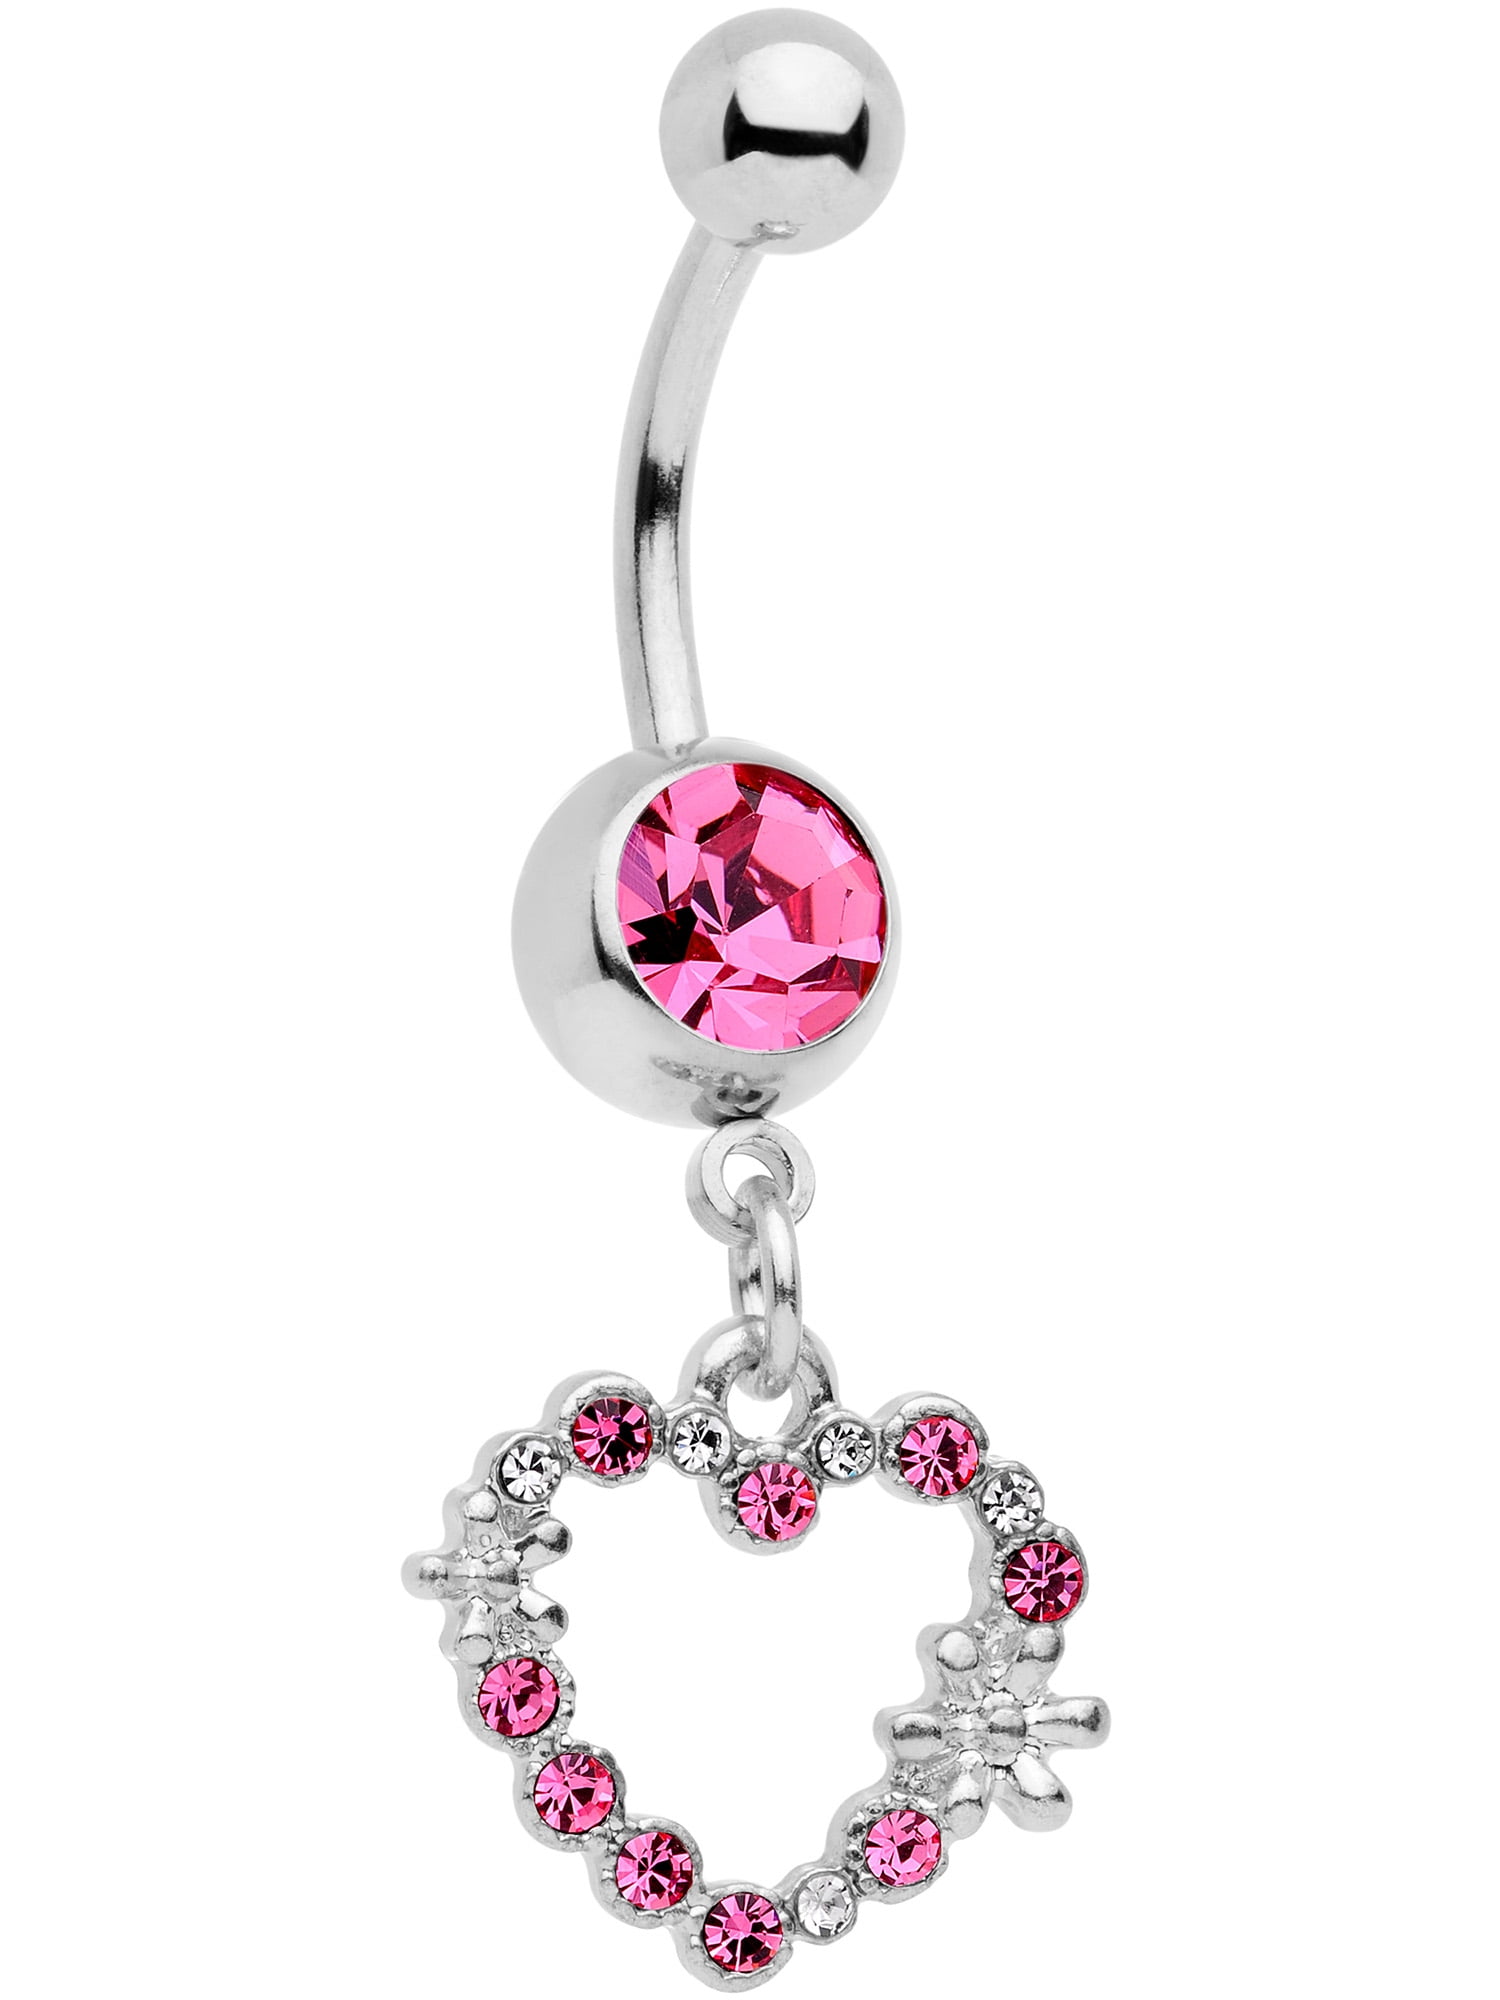 Body Candy 316L Stainless Steel Navel Ring Piercing Pink Accent ...